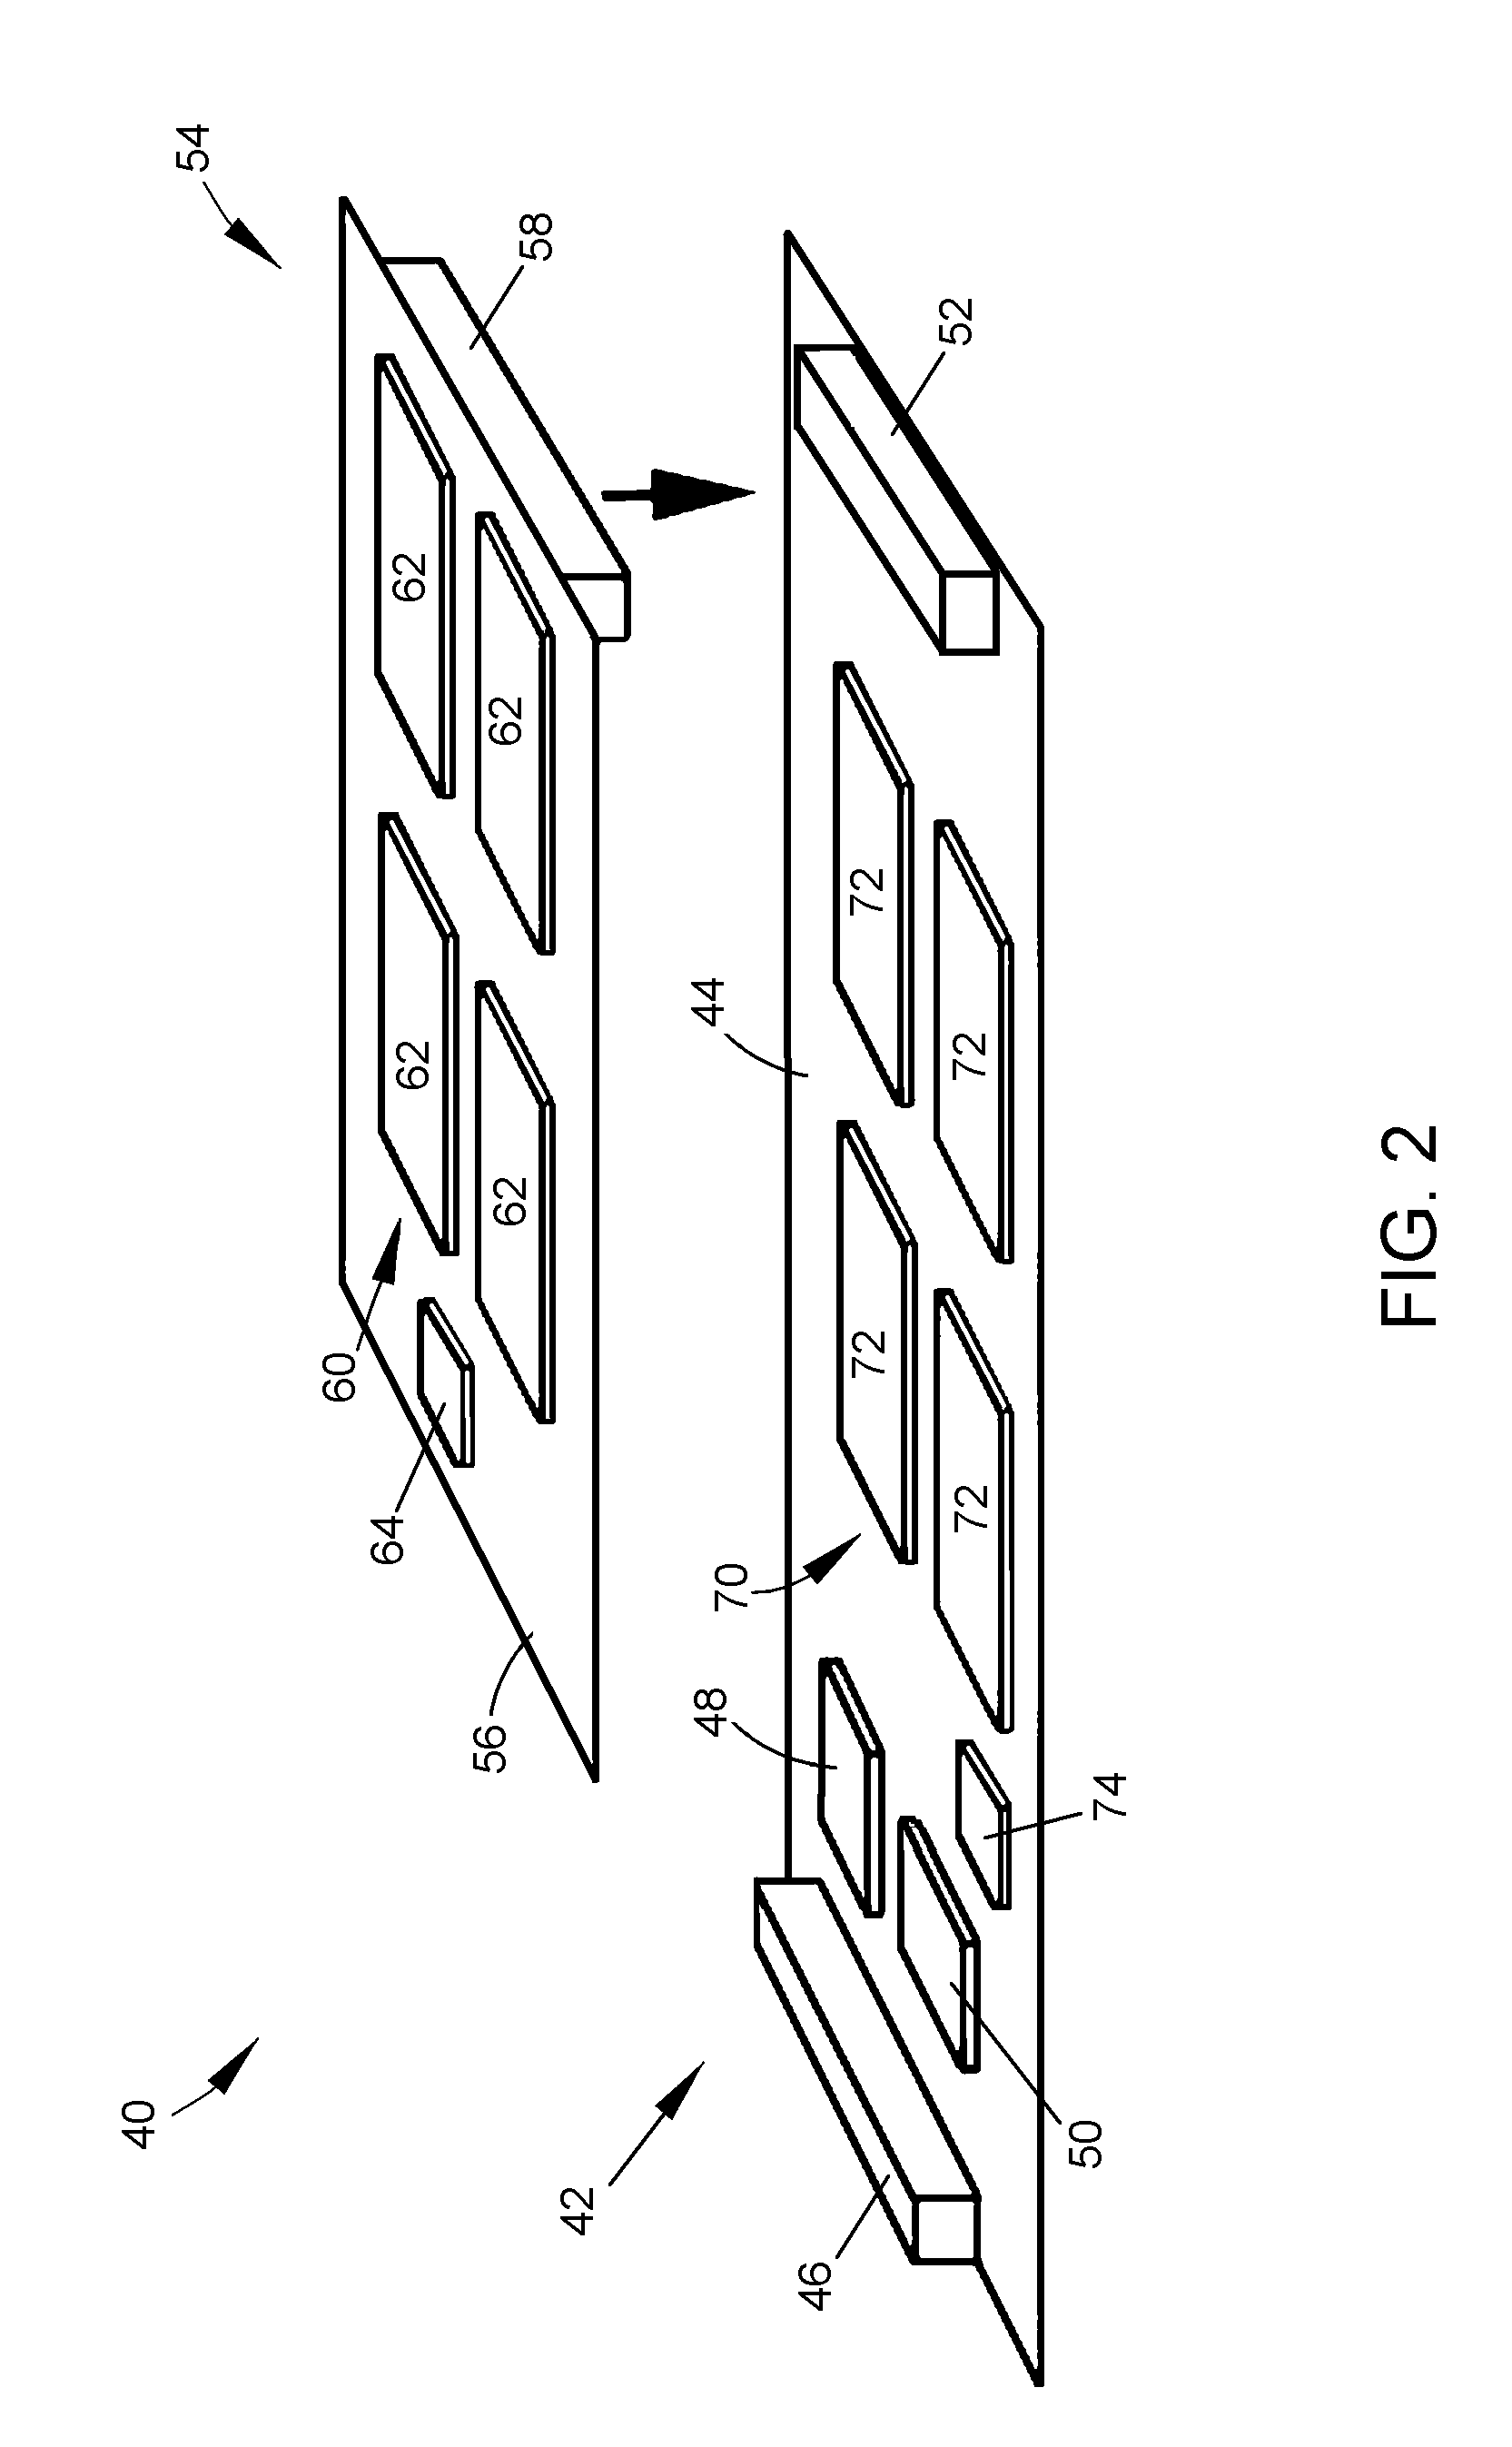 Modular mass storage devices and methods of using